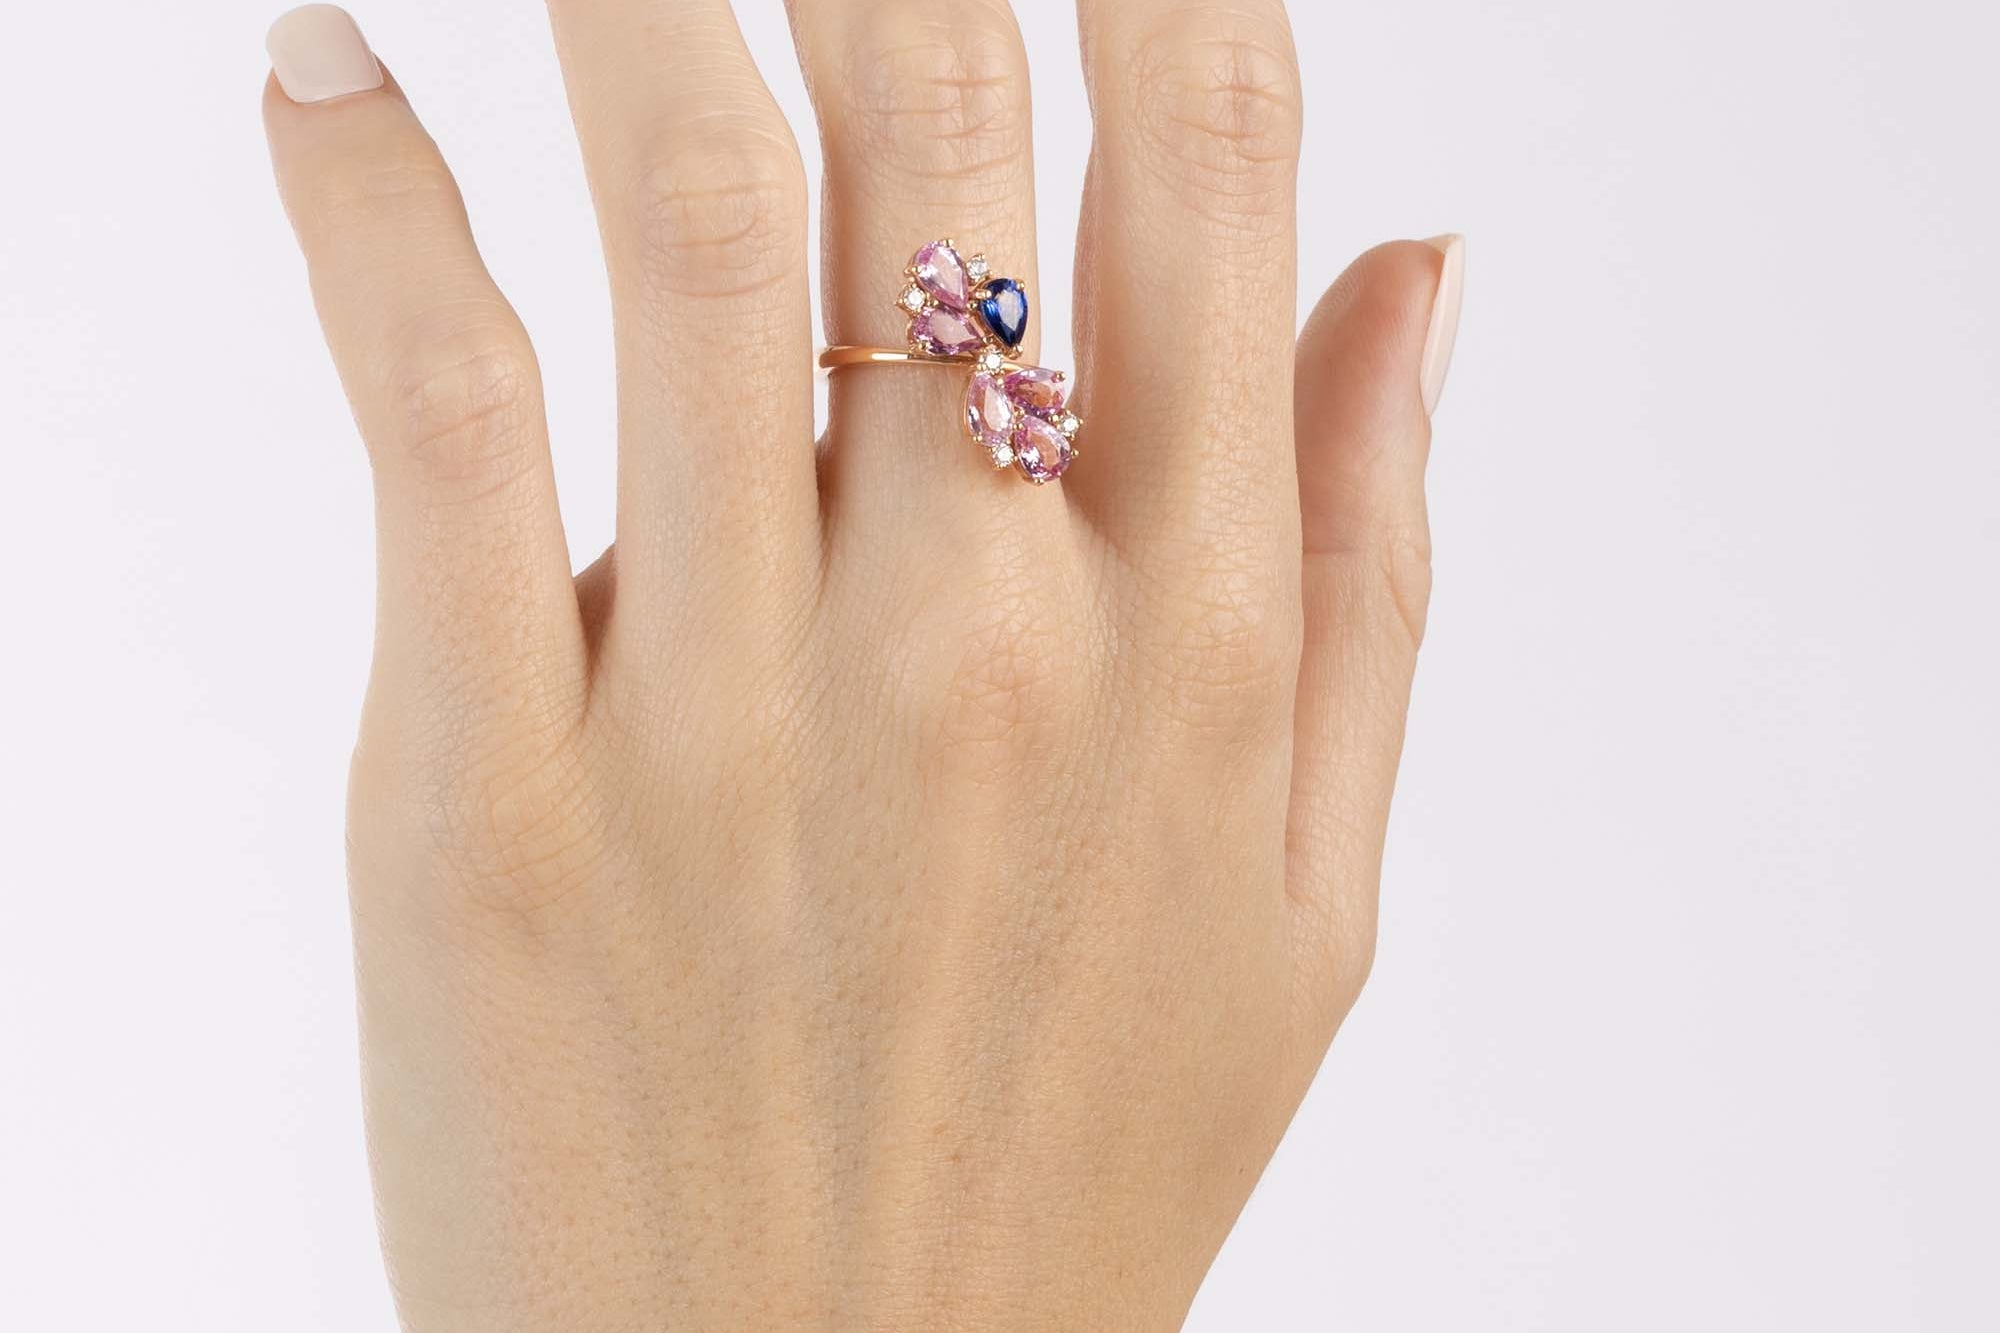 Rose Gold Ring with Pink Sapphires and a Blue Sapphire, and small round Diamonds - Model shot